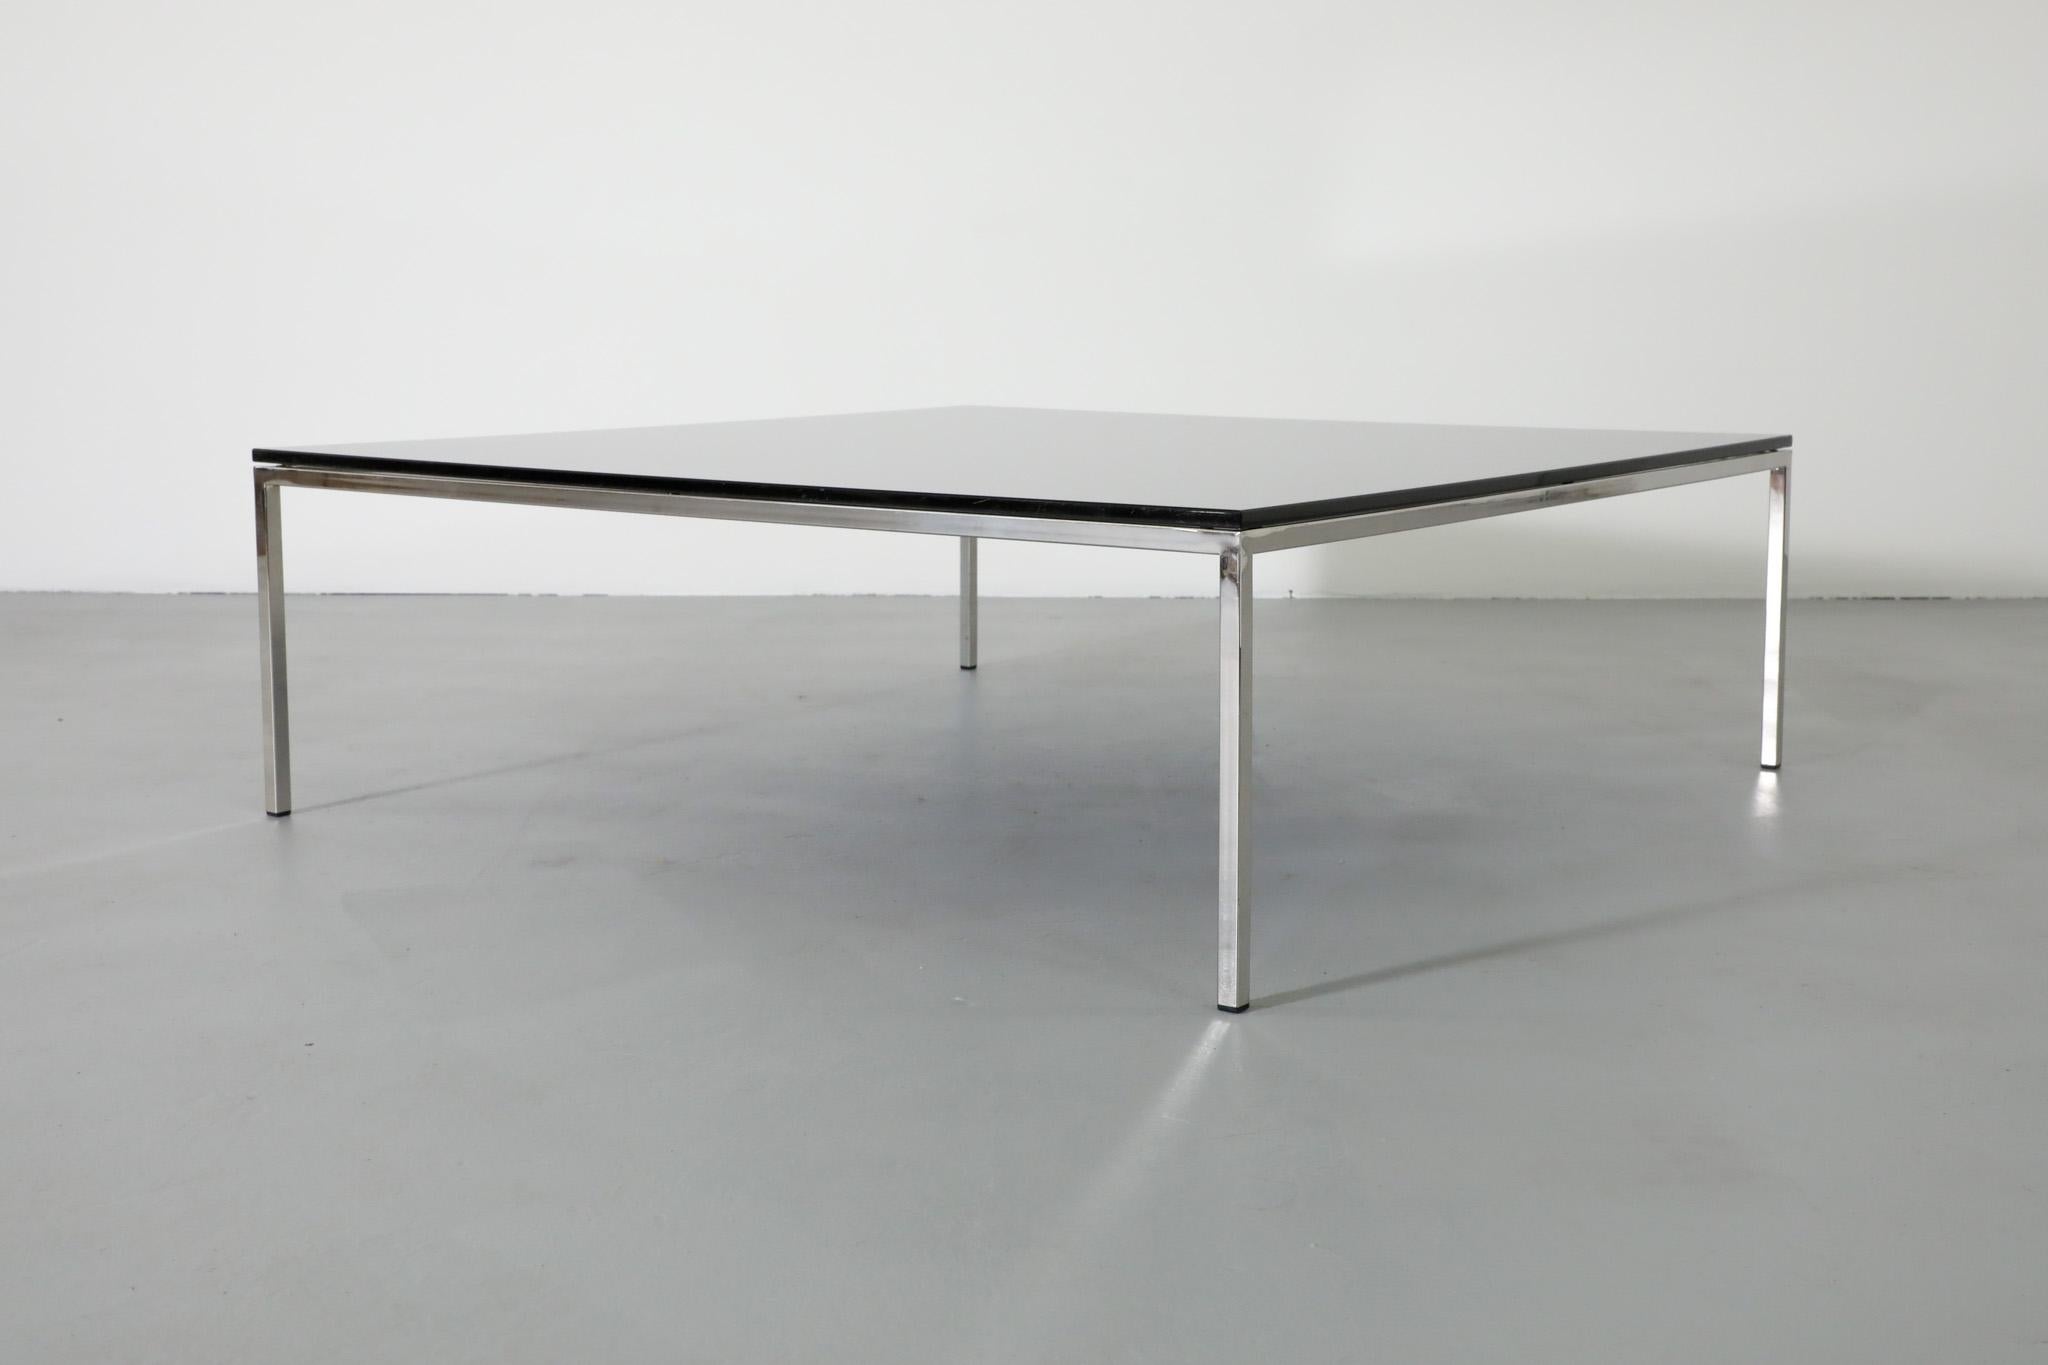 Late 20th Century Mid-Century Metaform Black Mirrored Glass and Chrome Coffee Table For Sale